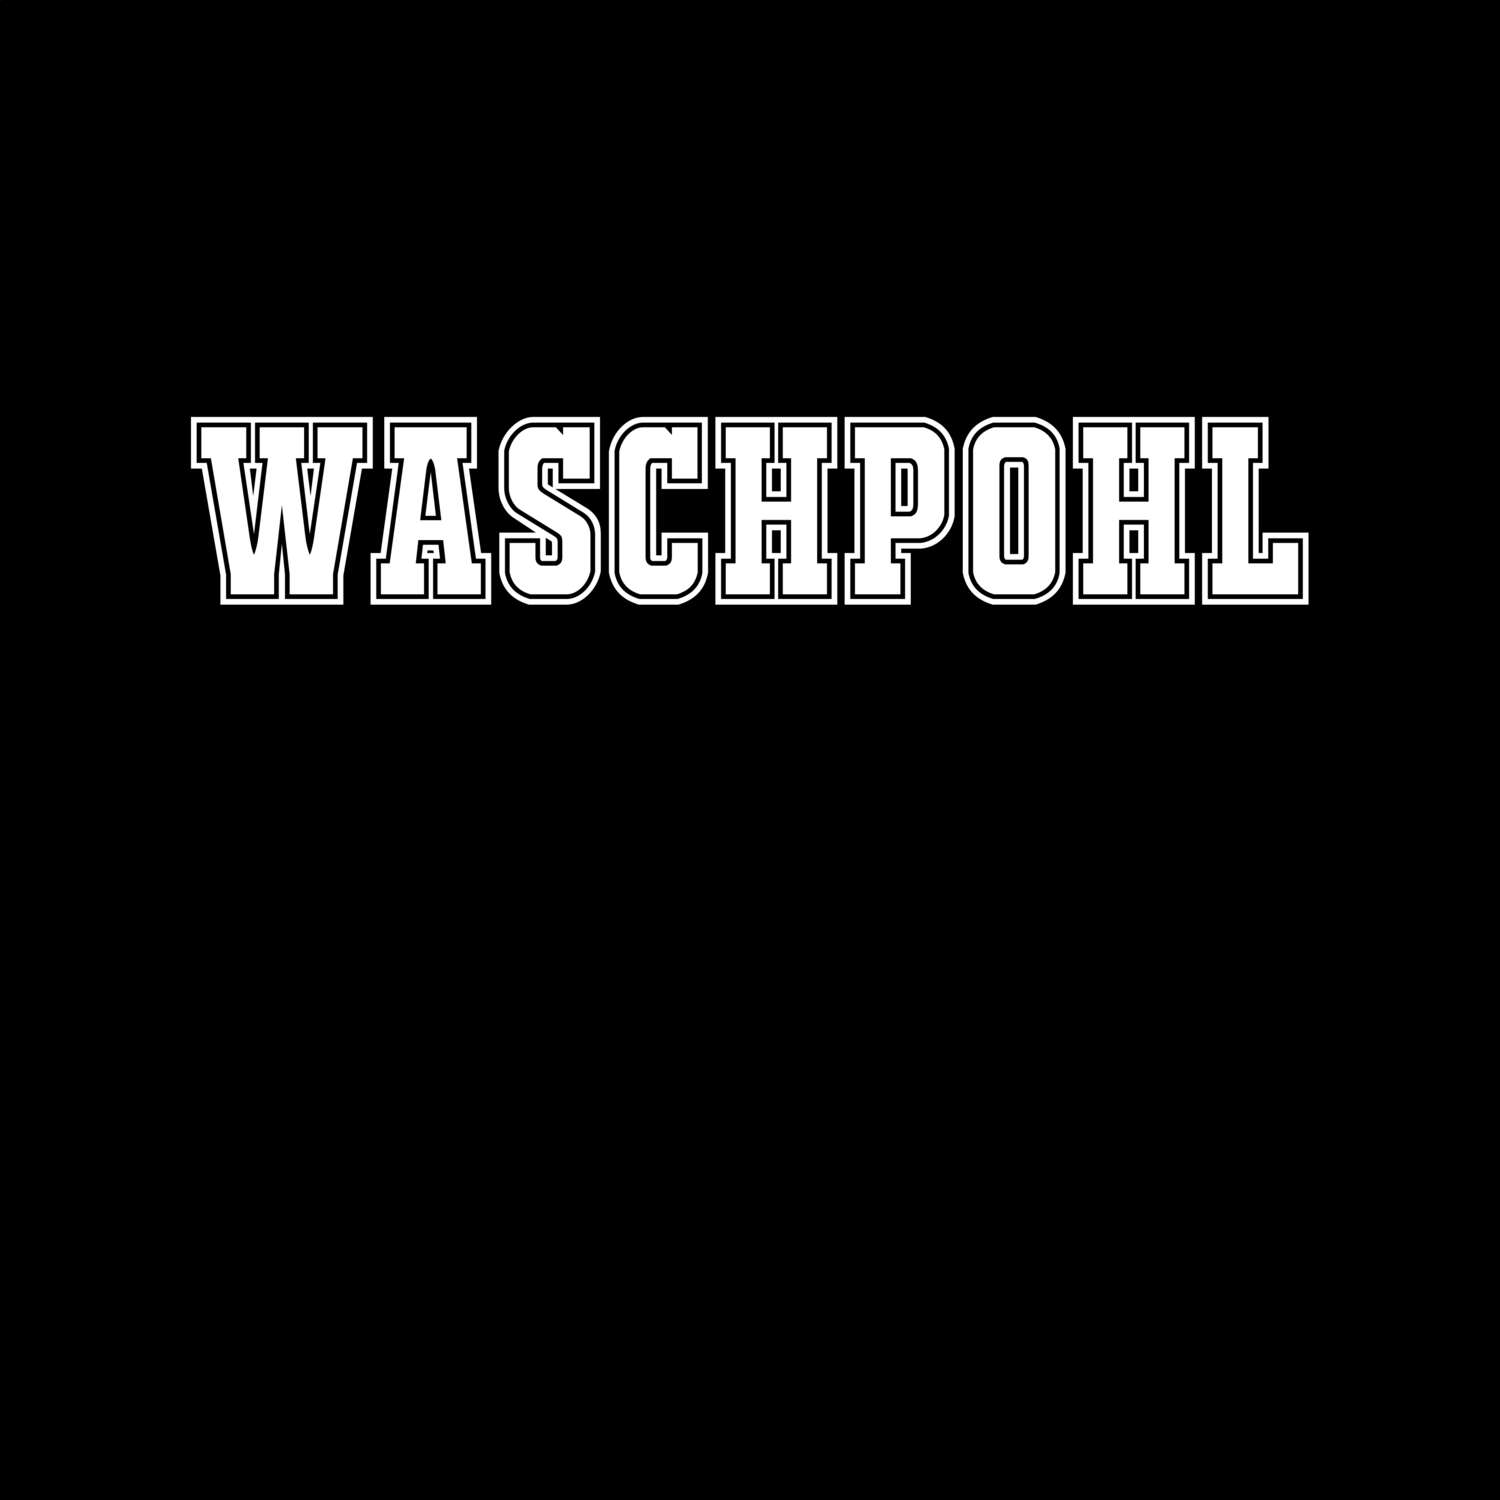 Waschpohl T-Shirt »Classic«